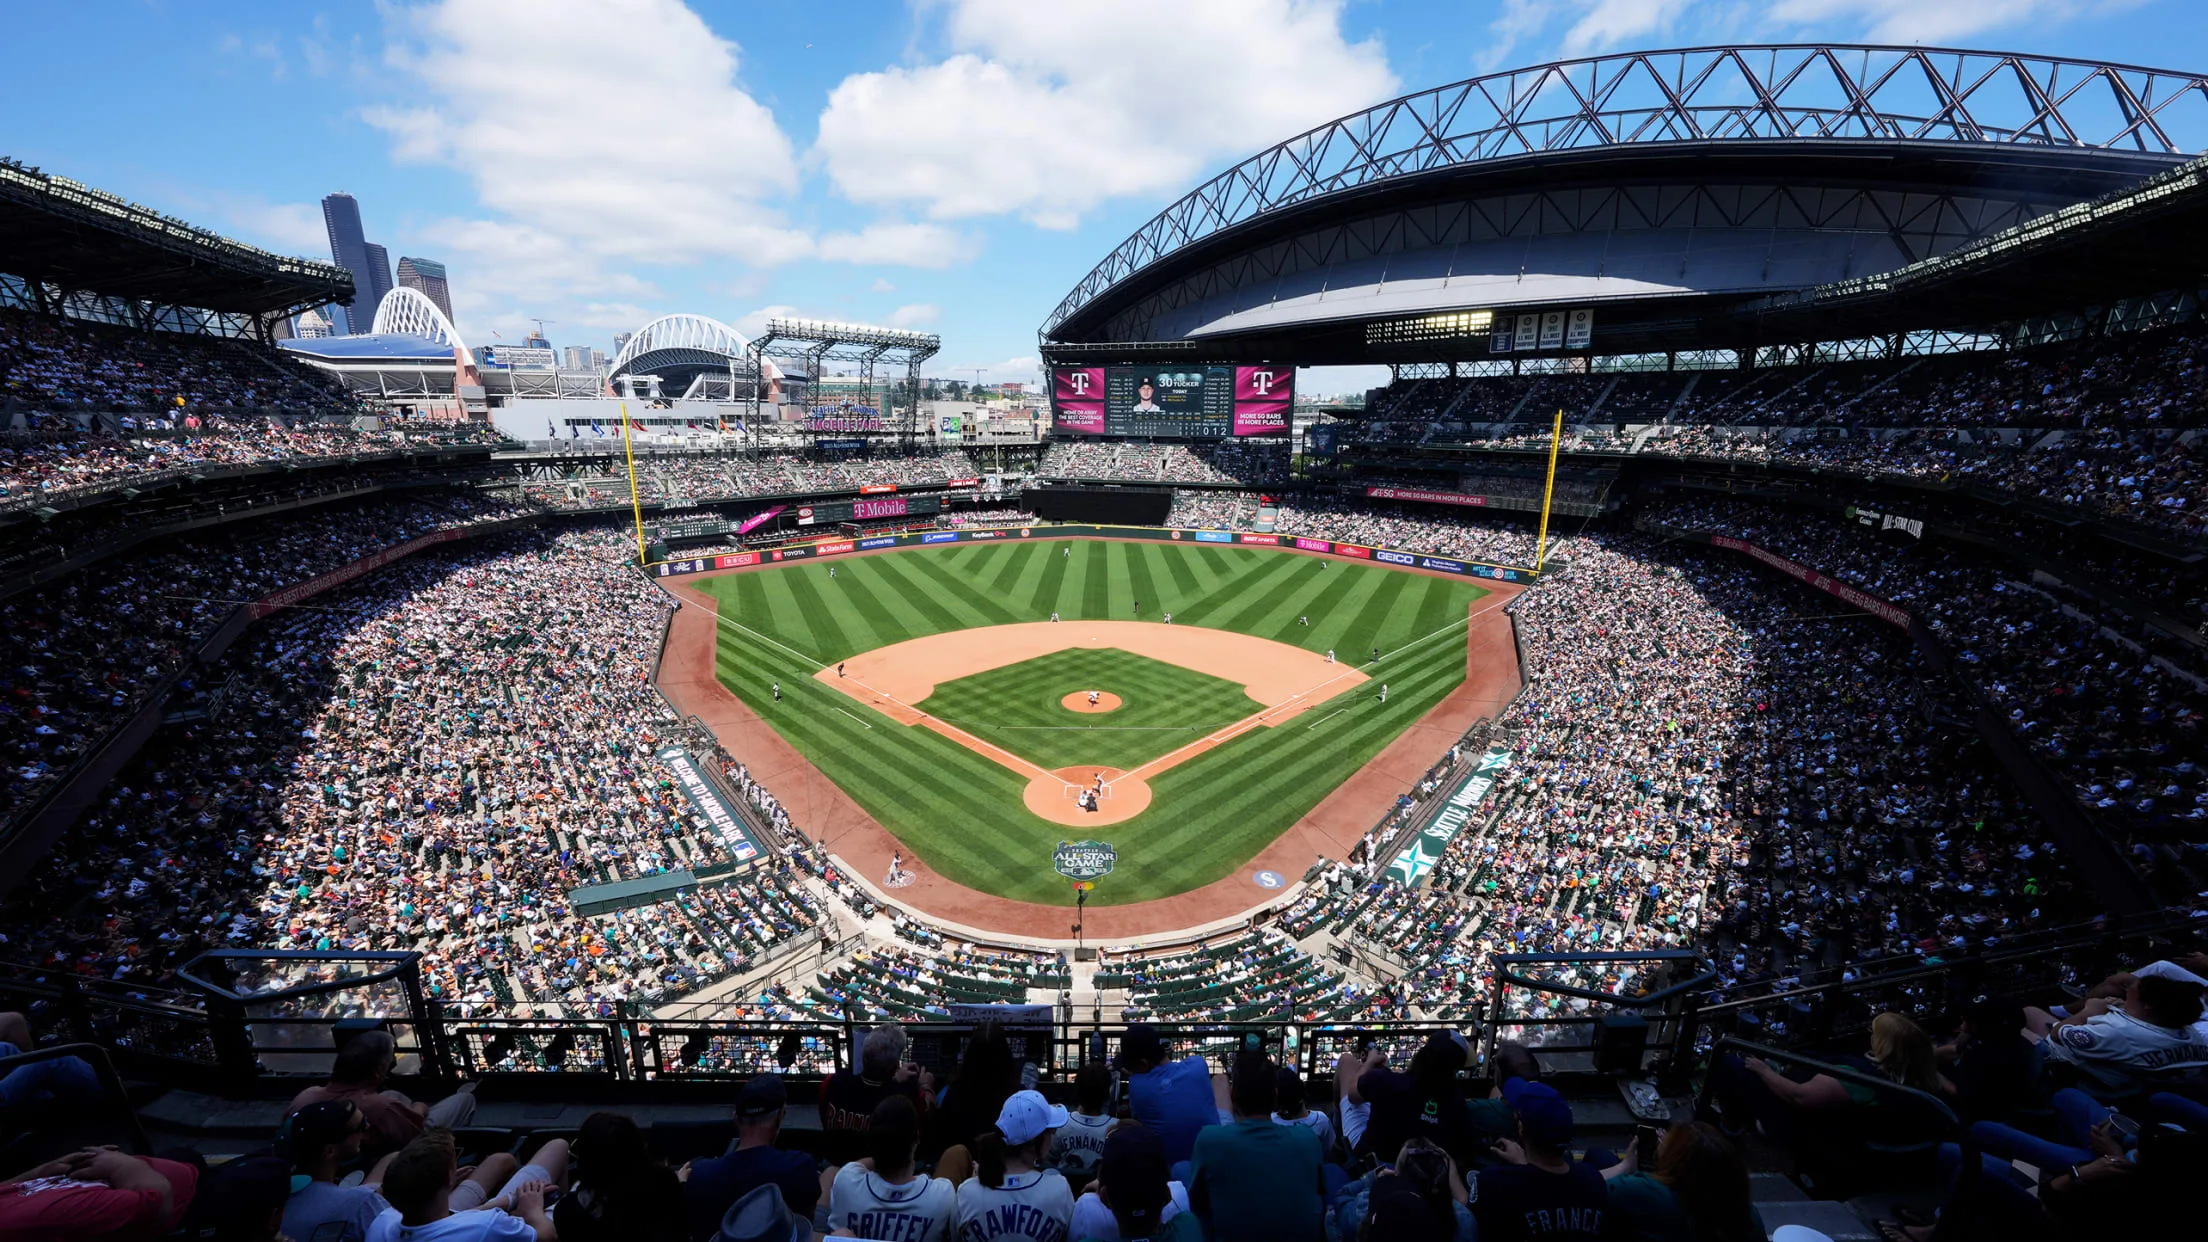 A view of a full T-Mobile Park during a warm Mariners game day in Seattle, Washington.